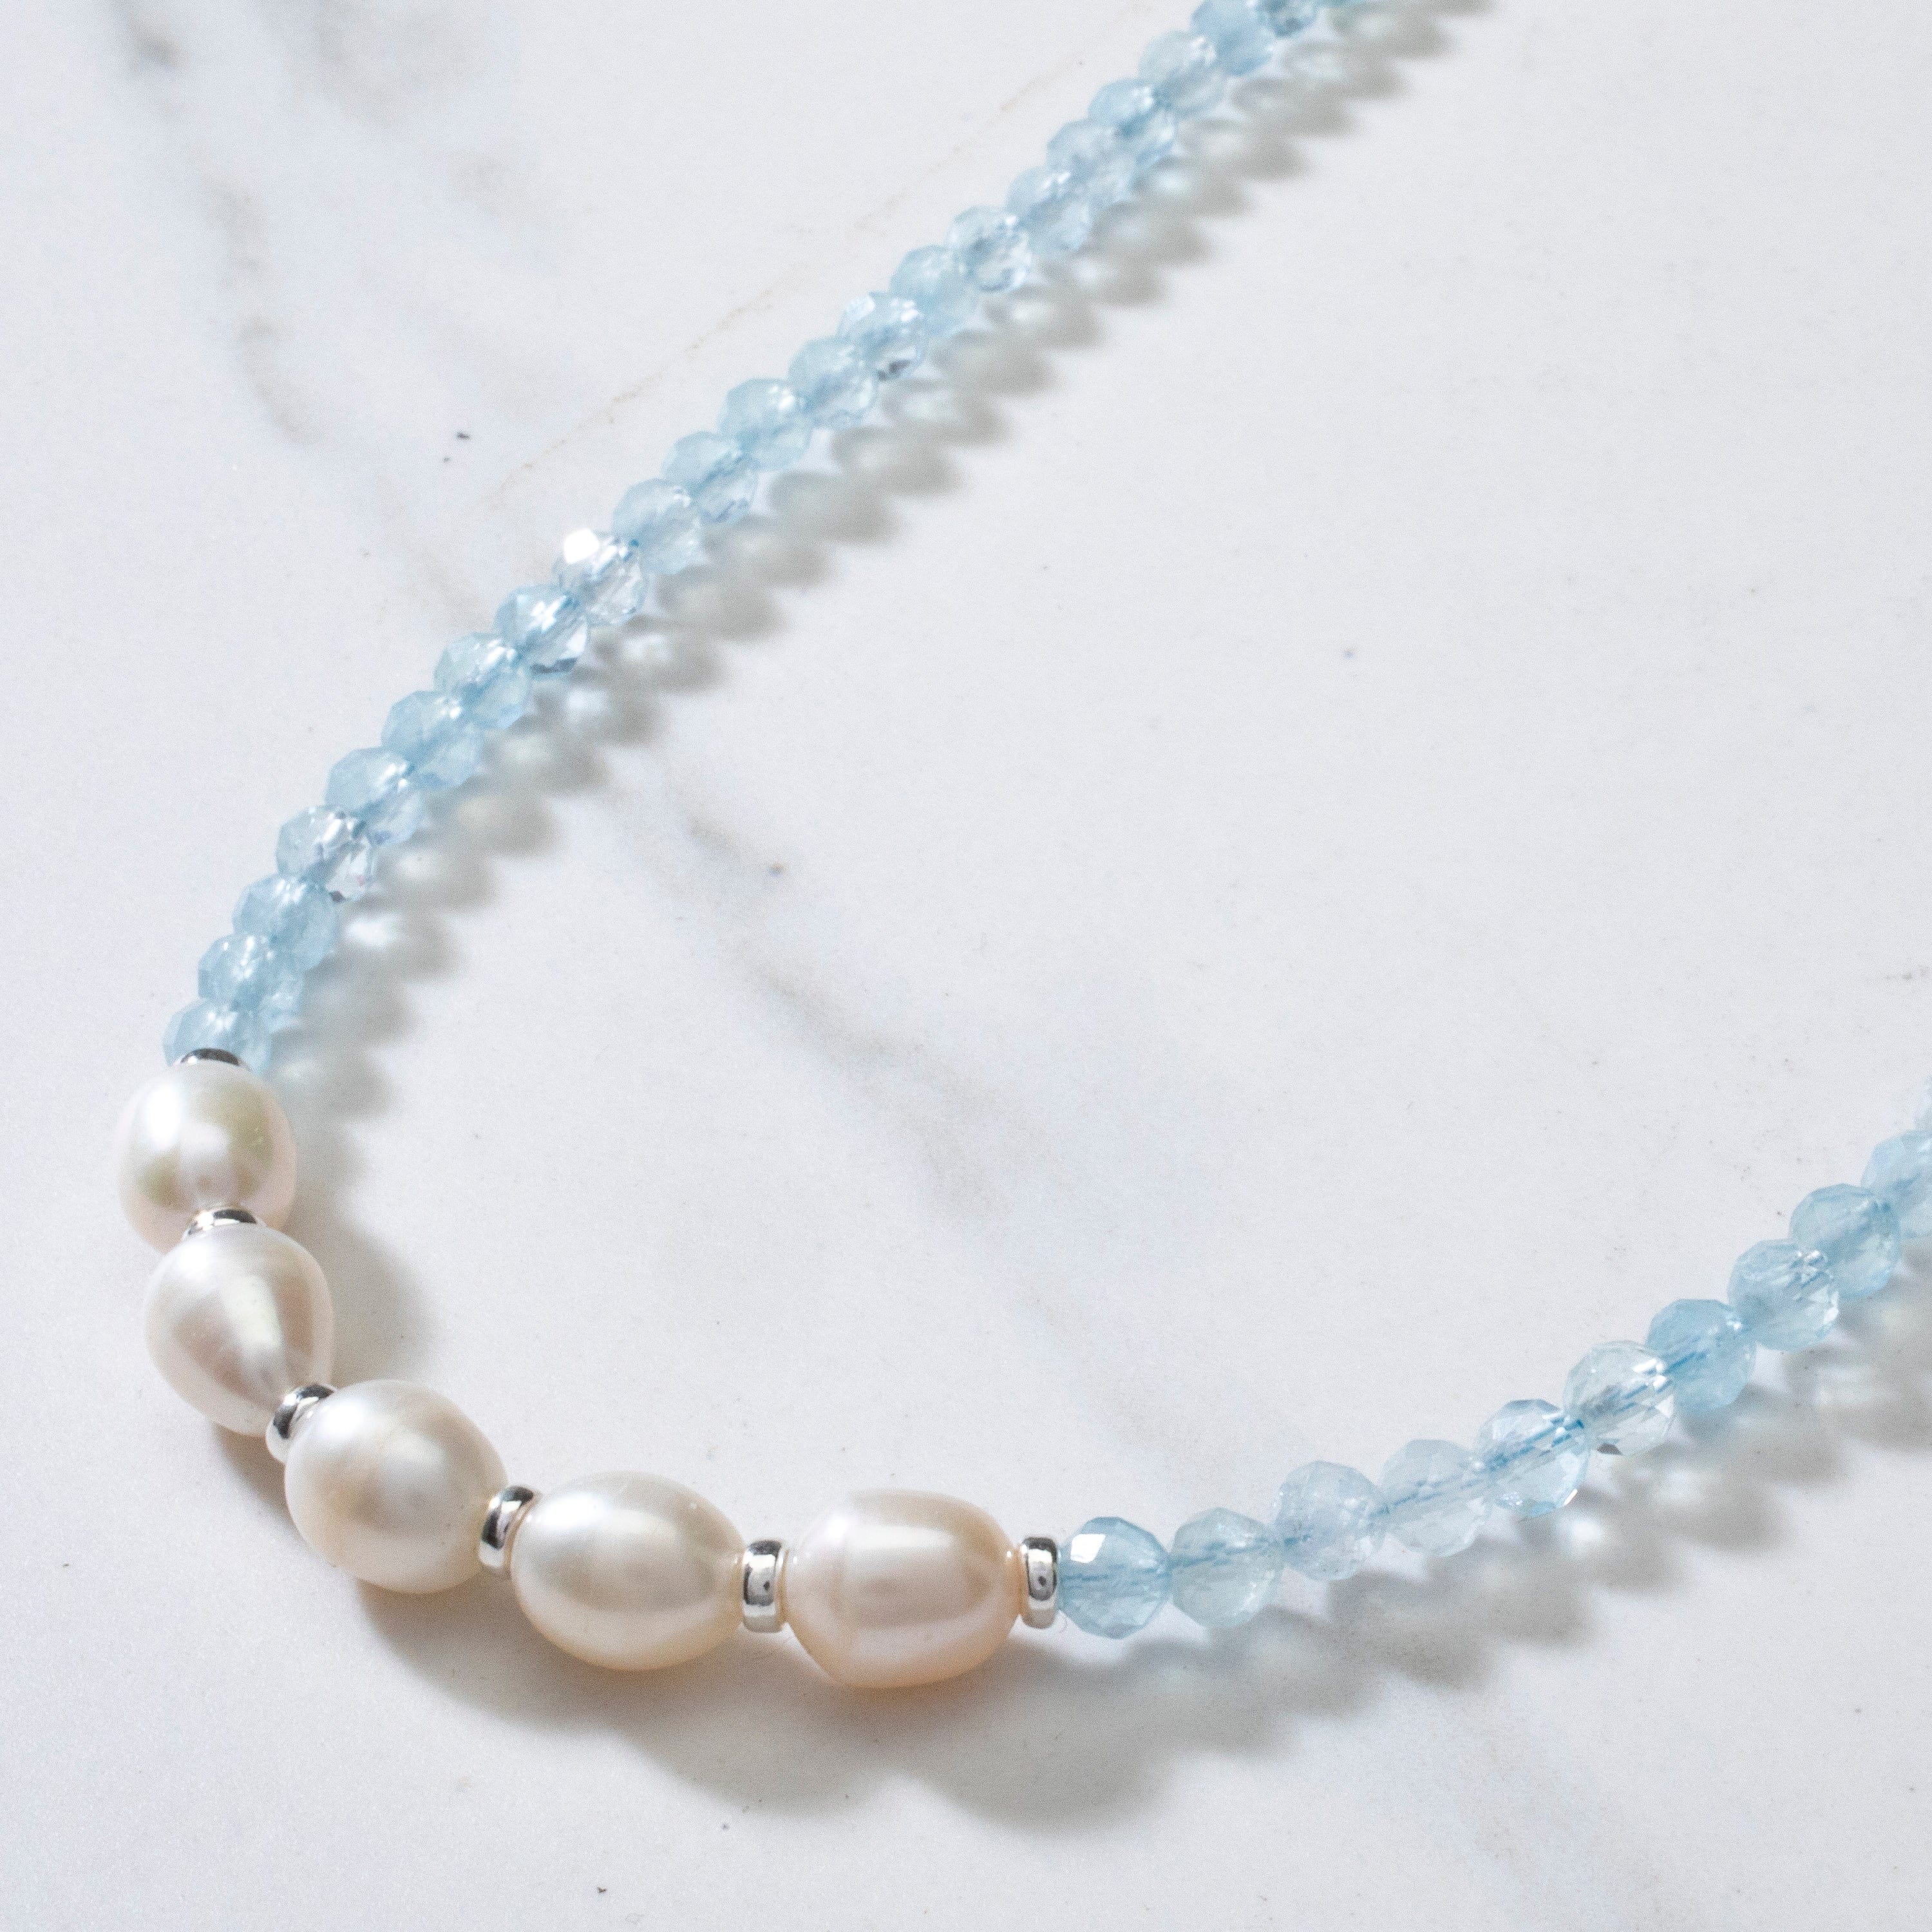 KALIFANO Jewelry 4mm Faceted Aquamarine Bead Necklace with 5 Pearls with 925 Silver Clasp 4MAQ